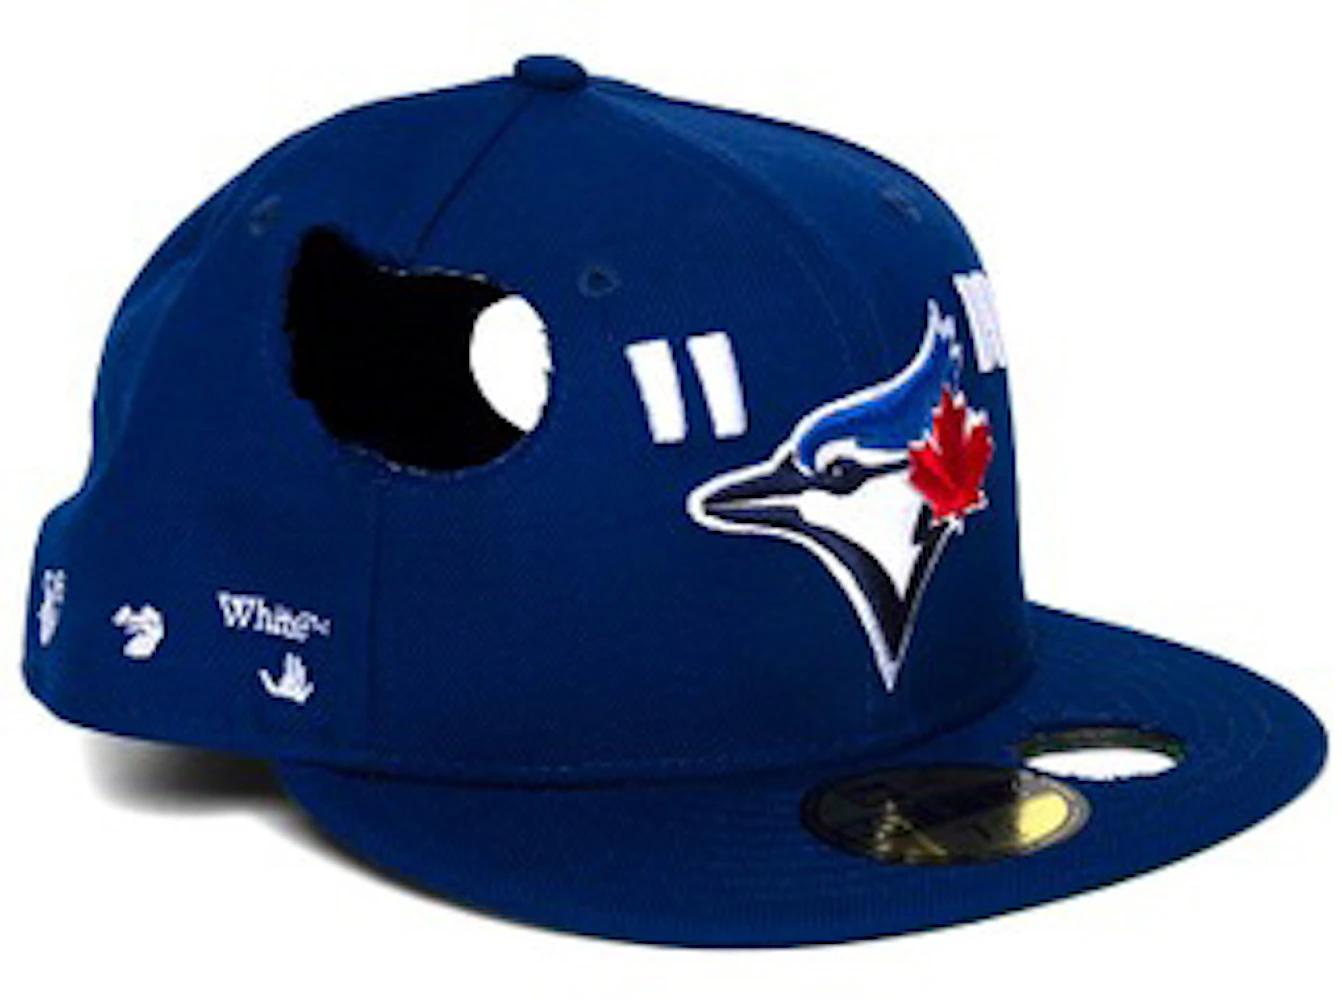 Men's New Era Red Toronto Blue Jays White Logo 59FIFTY Fitted Hat